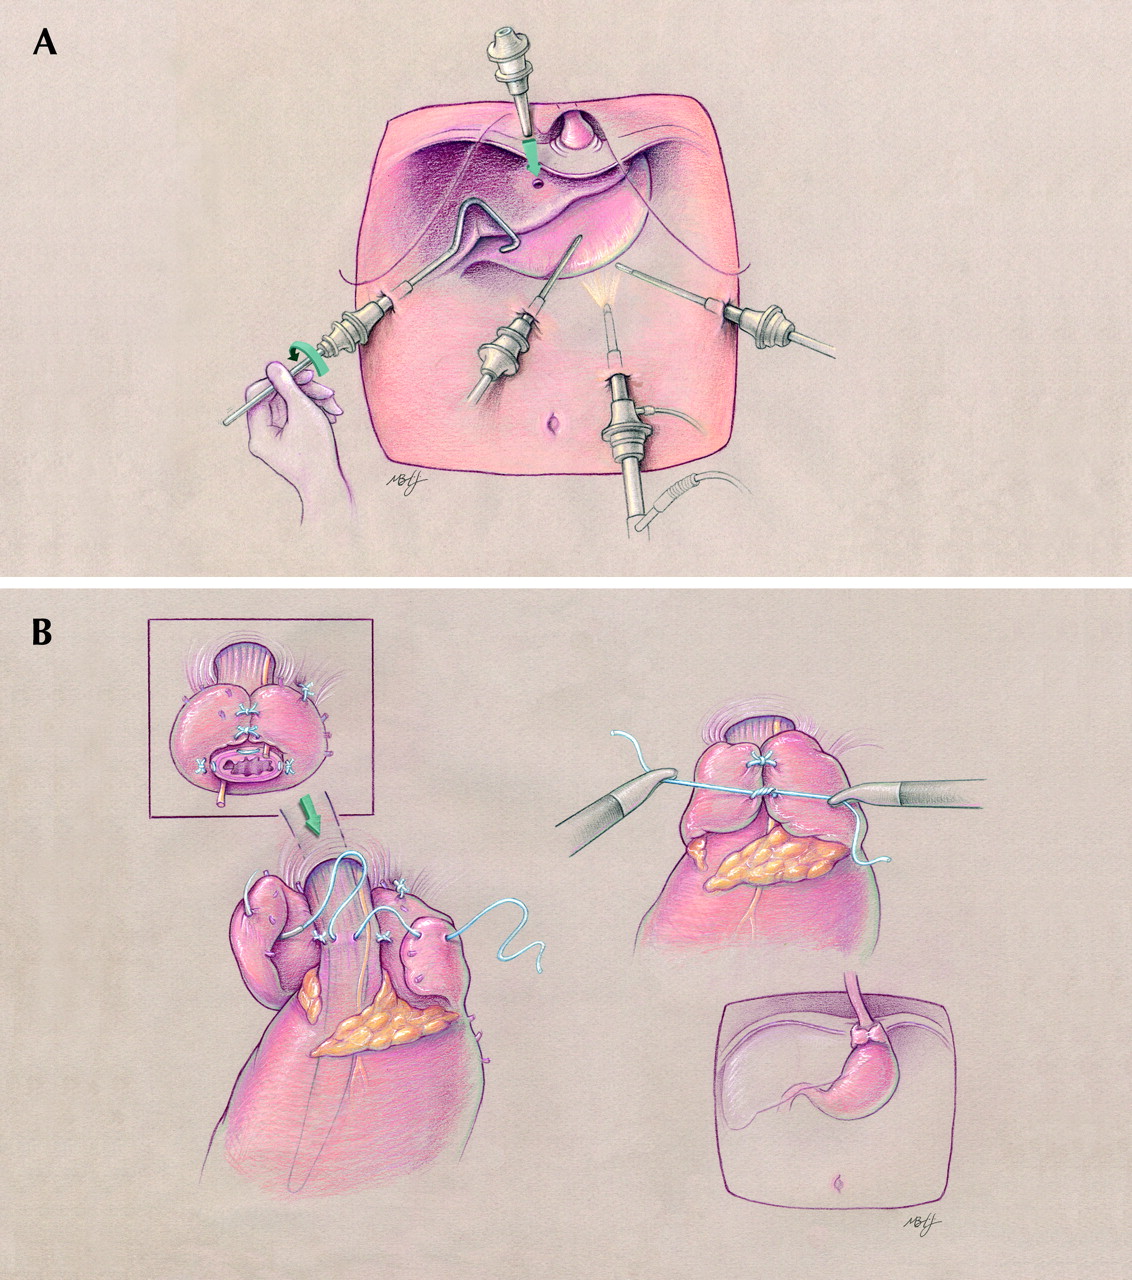 Whither surgery in the treatment of gastroesophageal reflux